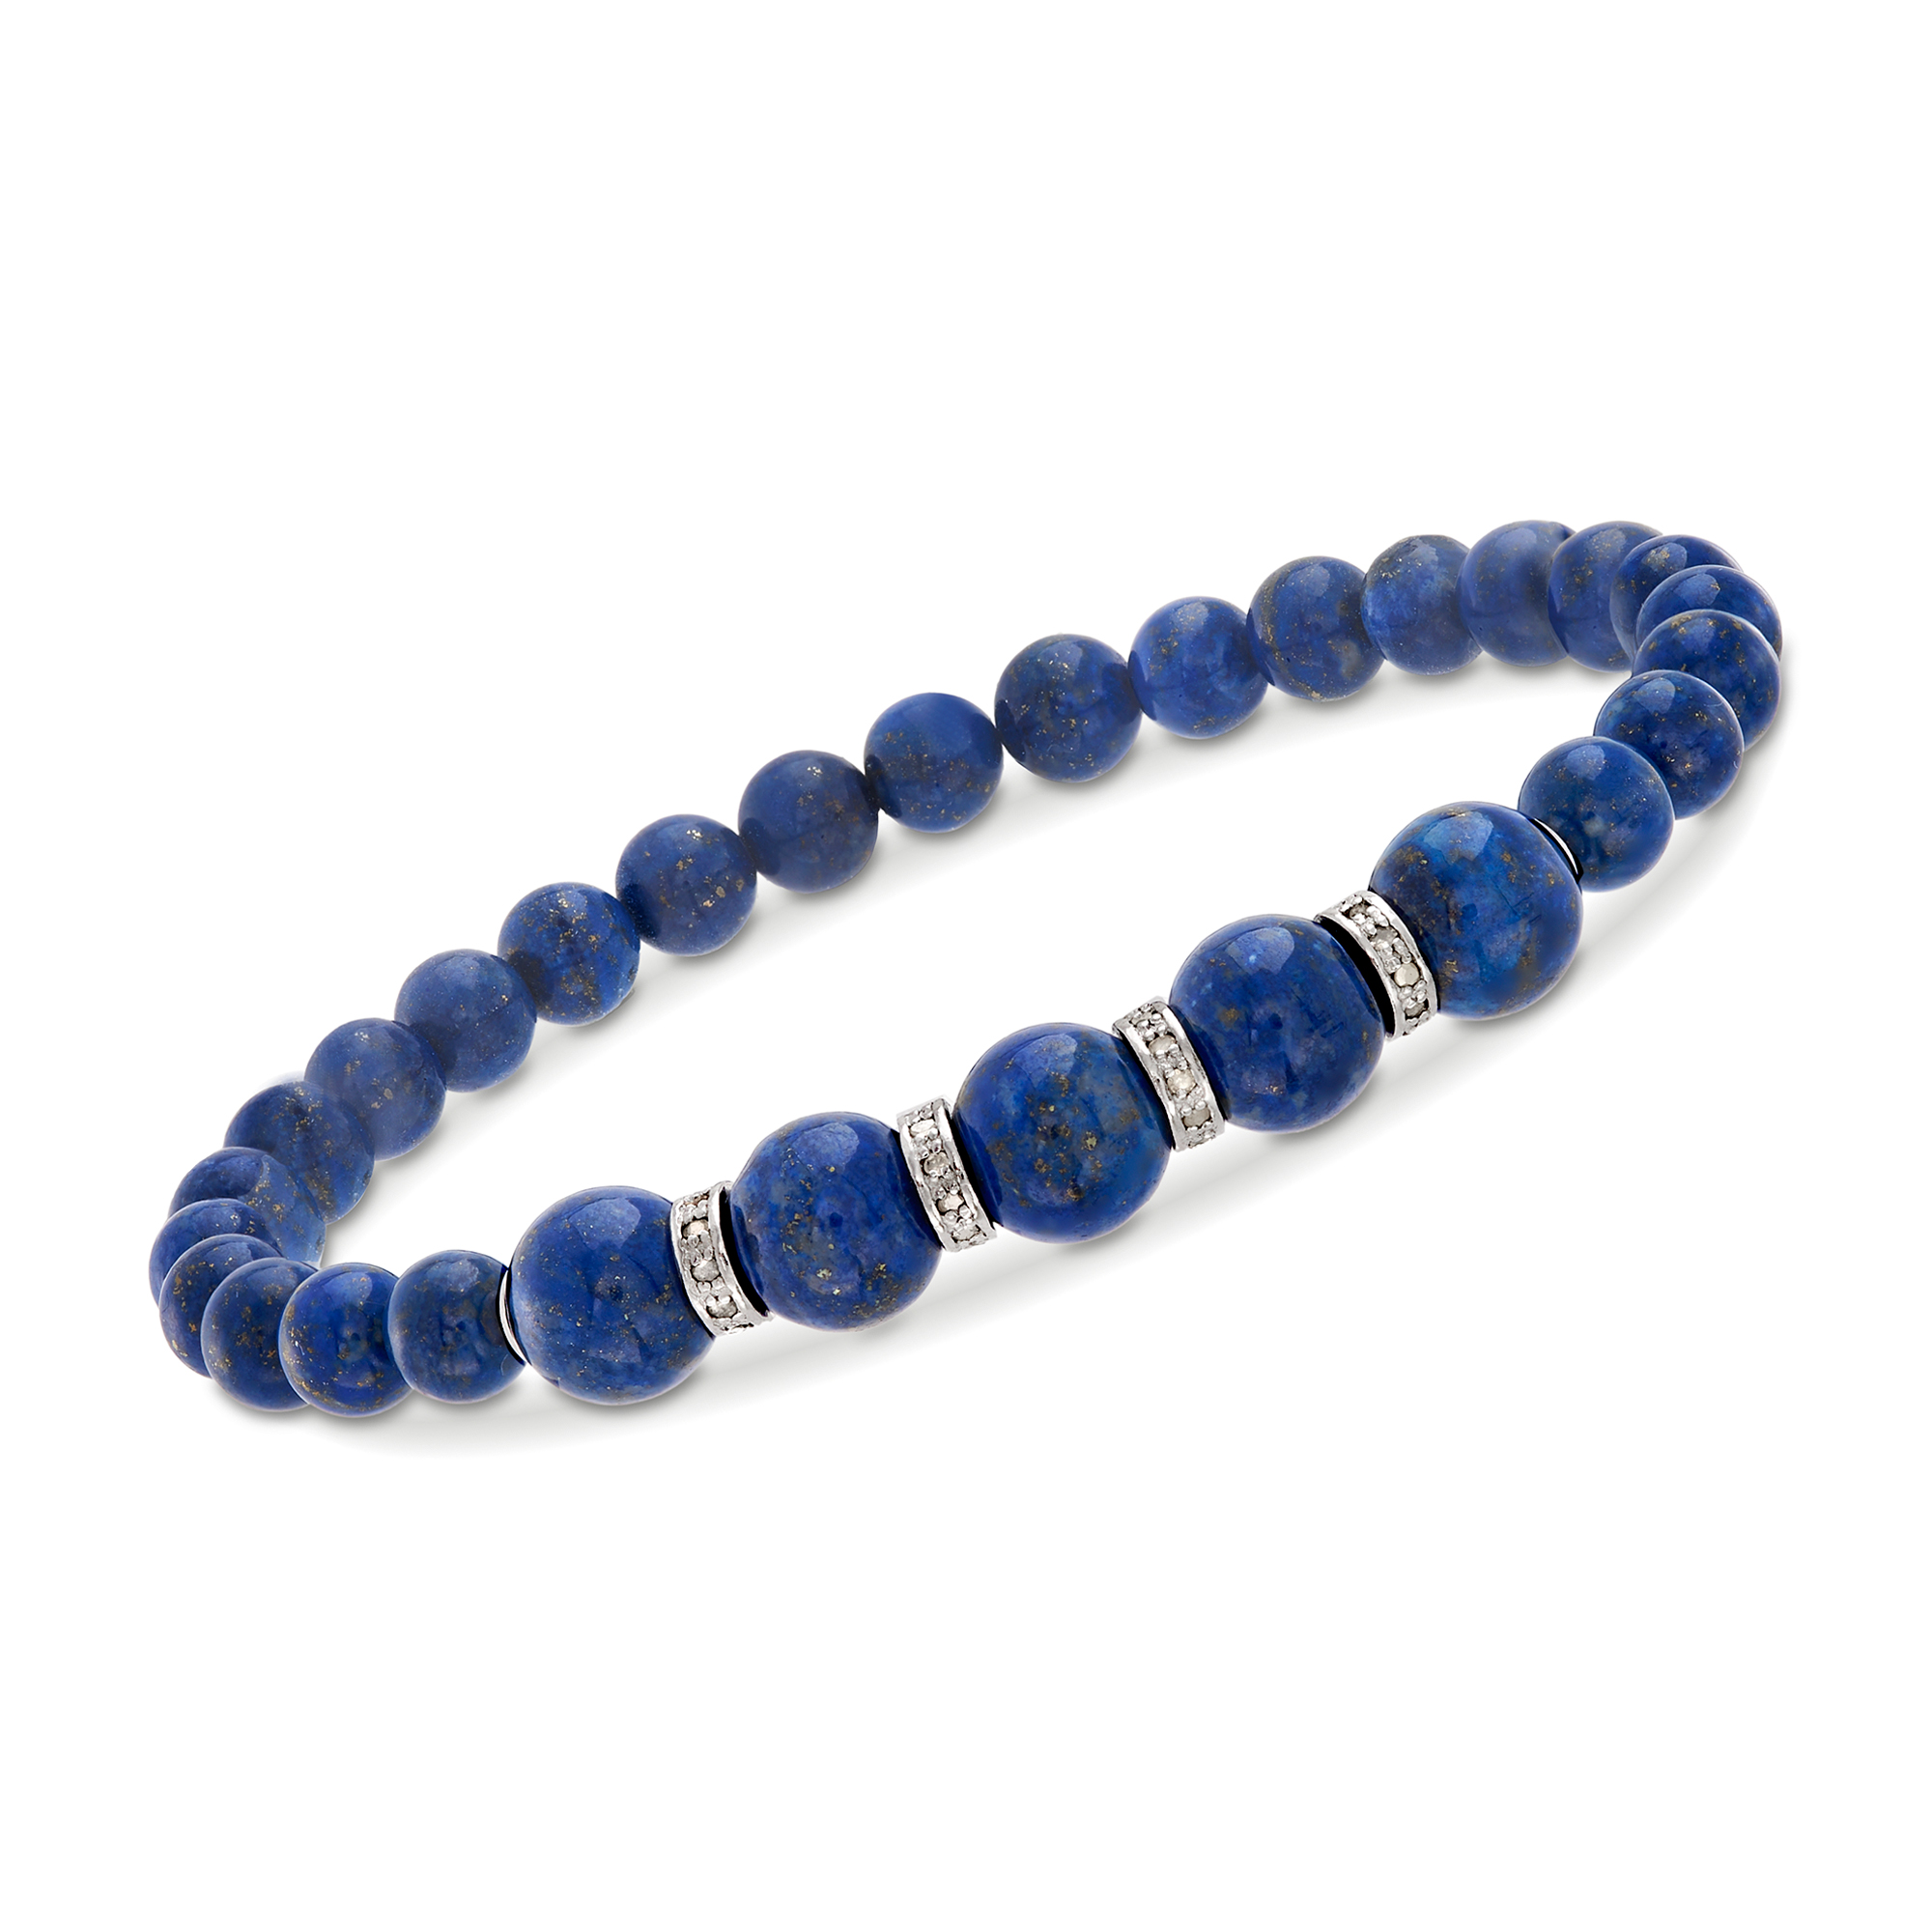 6-8mm Lapis Bead and .24 ct. t.w. Diamond Stretch Bracelet with Sterling  Silver | Ross-Simons